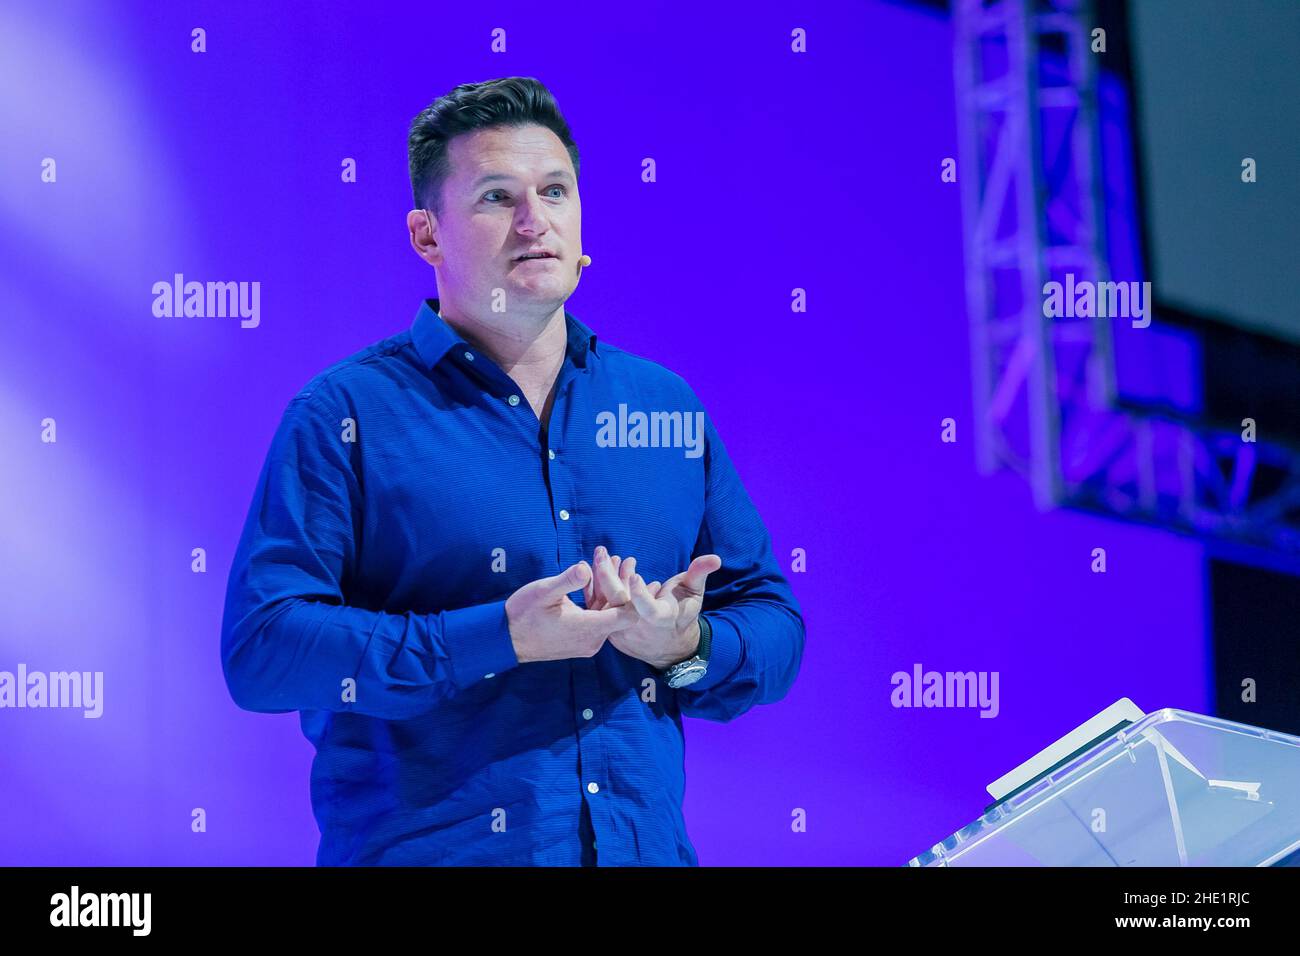 Johannesburg, South Africa - August 21, 2018: Ex Cricket Captain Graeme Smith on stage at Think Sales Convention Stock Photo